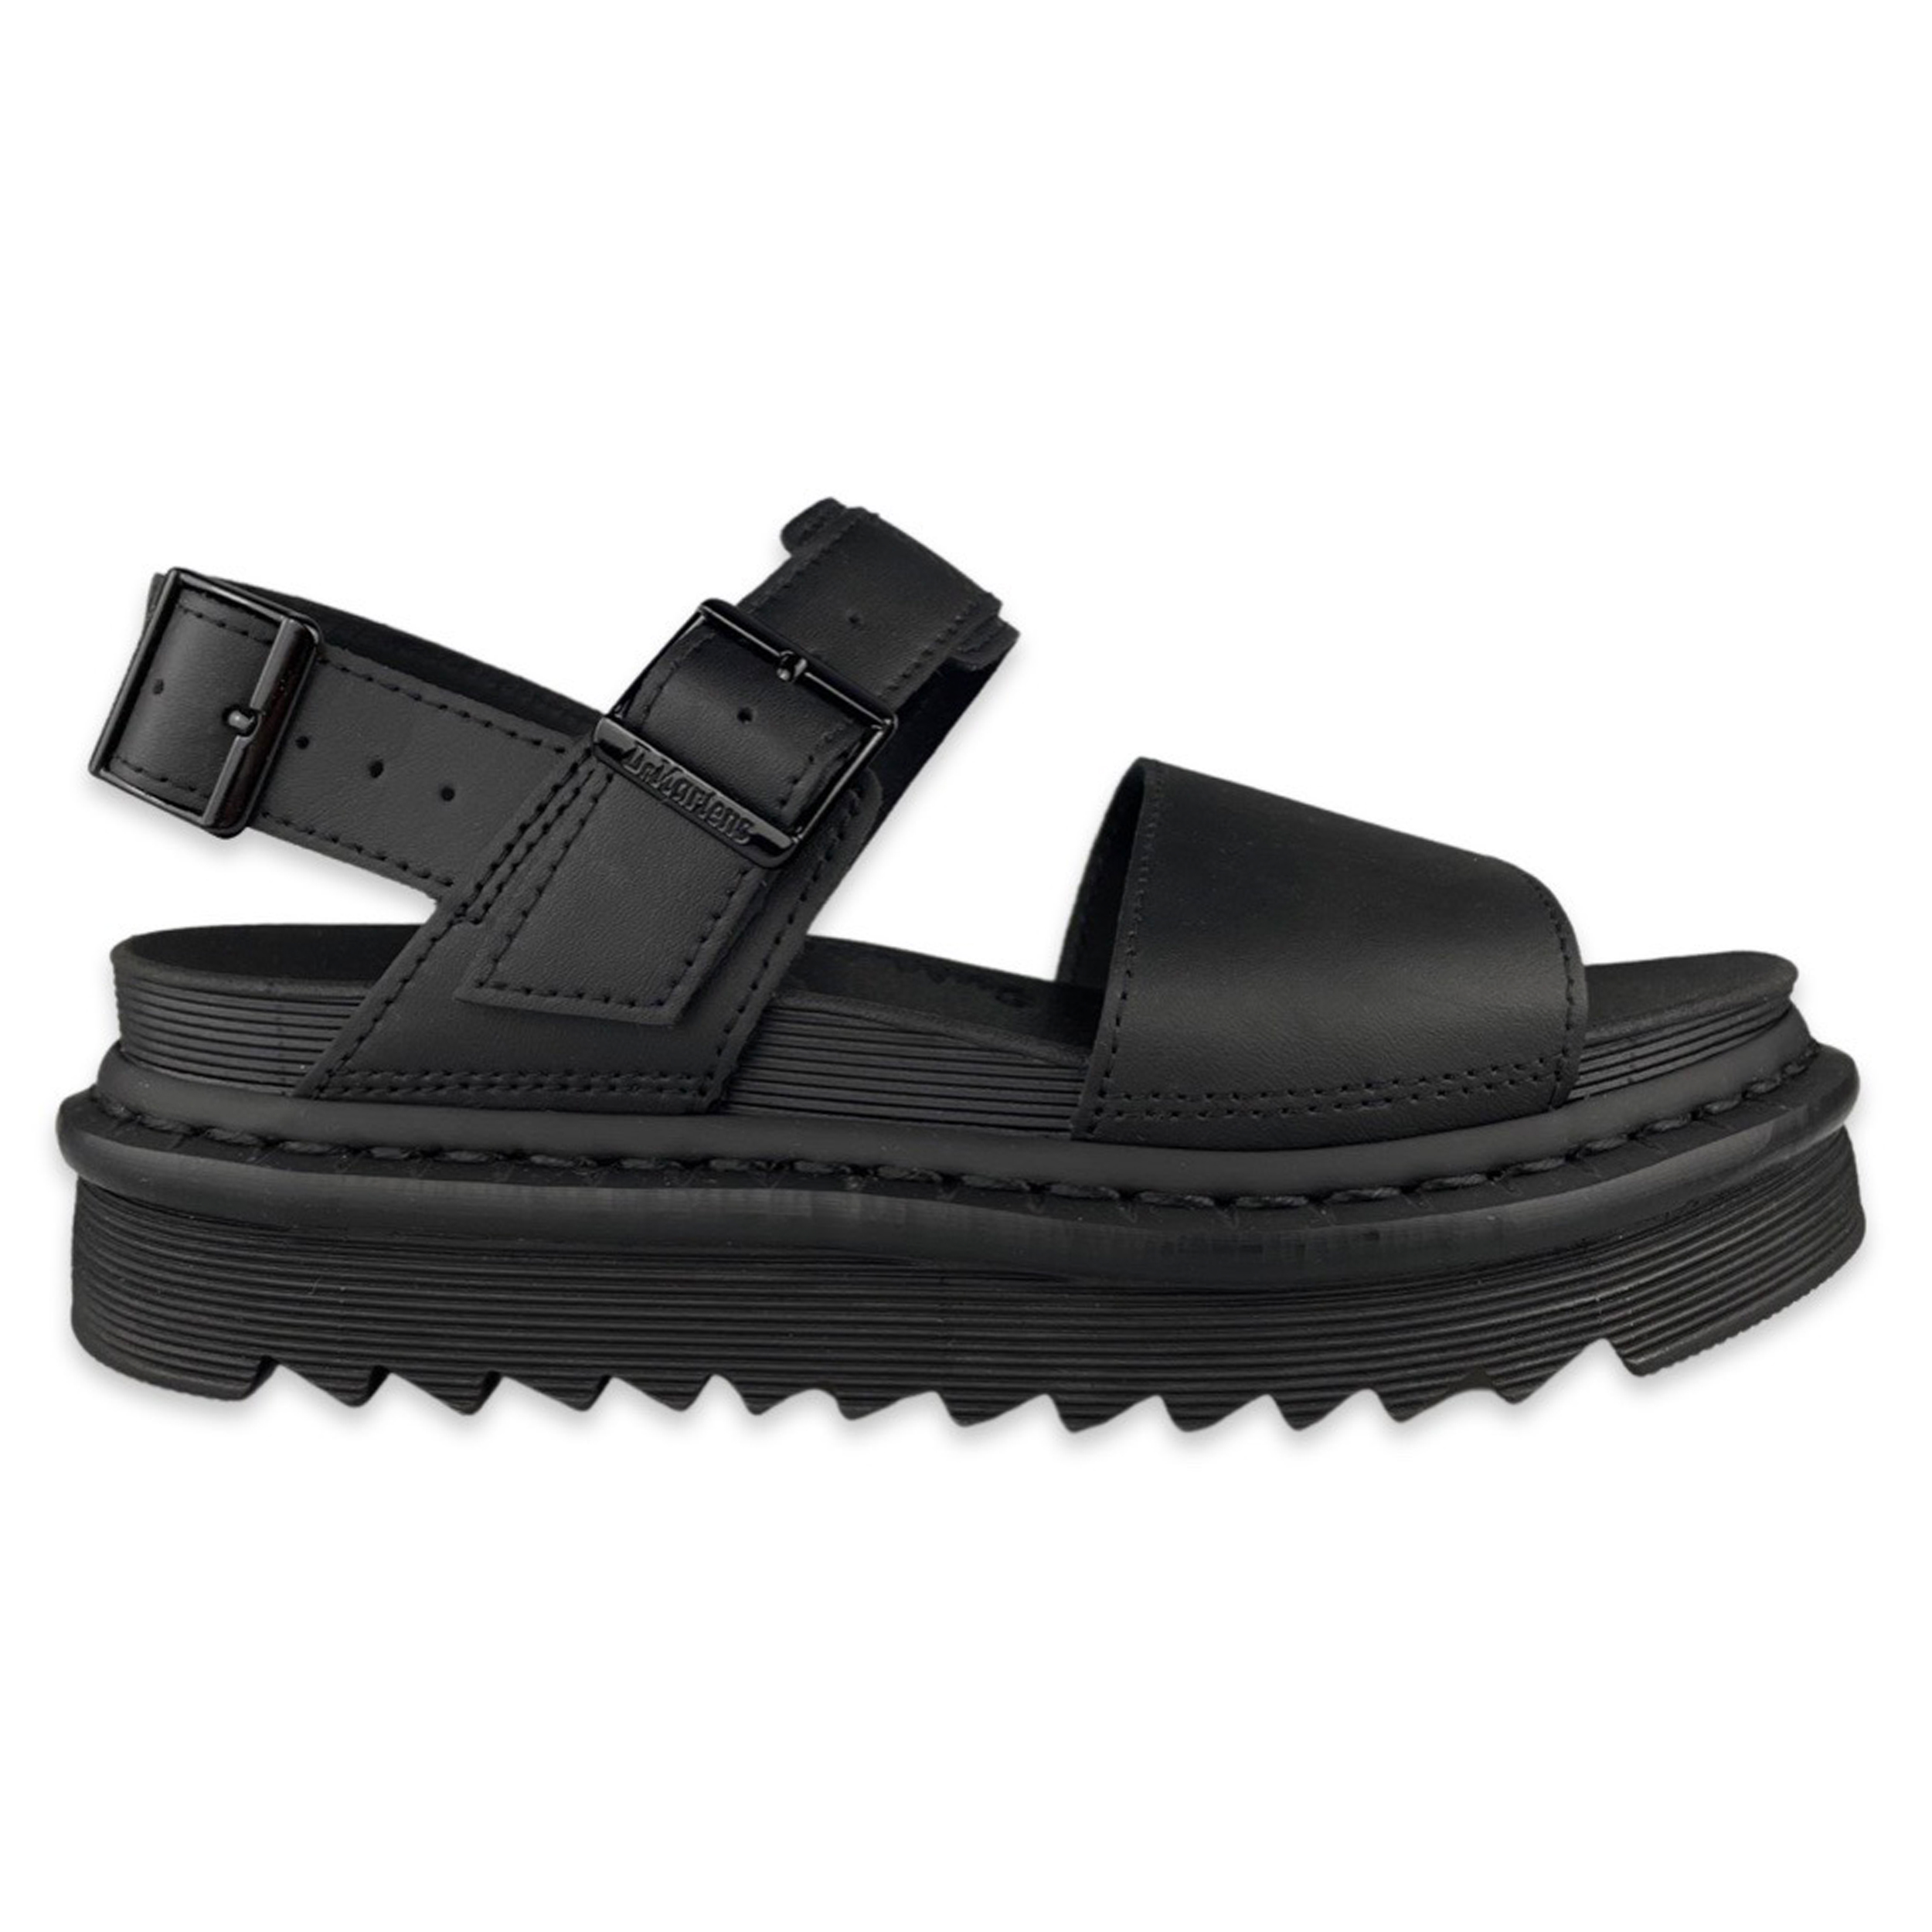 Dr. Martens Voss Black Hydro Leather